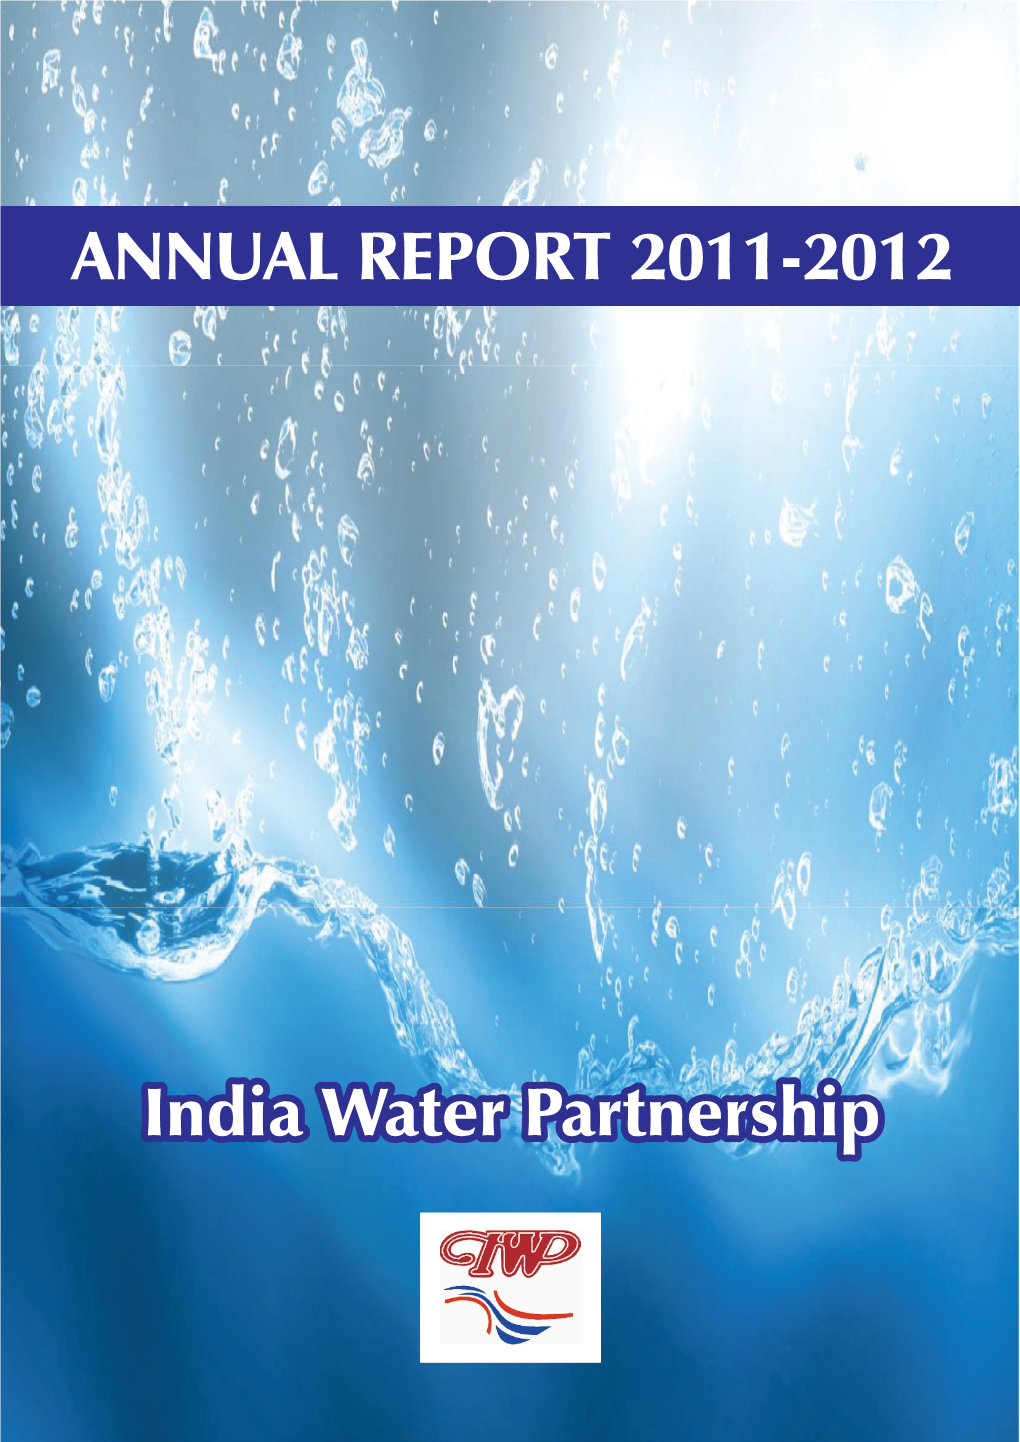 To See Annual Report 2011-12